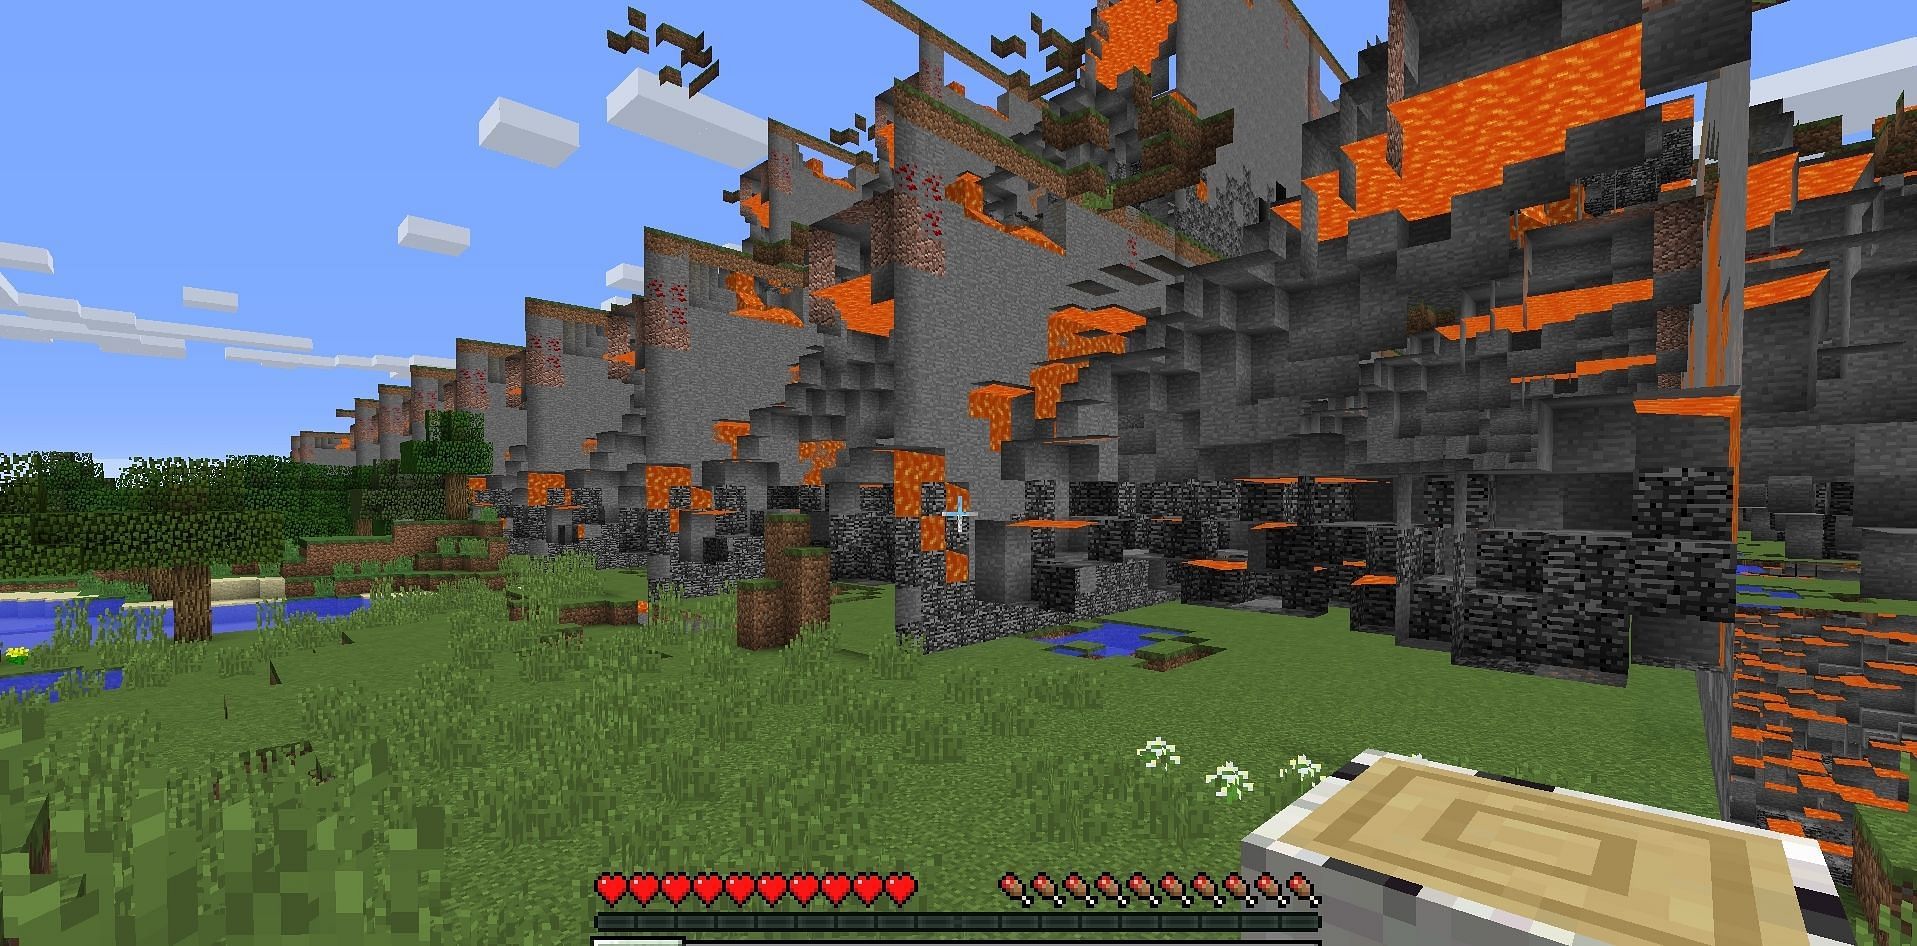 Many Minecraft bugs have been uncovered throughout the years (Image via Mojang)